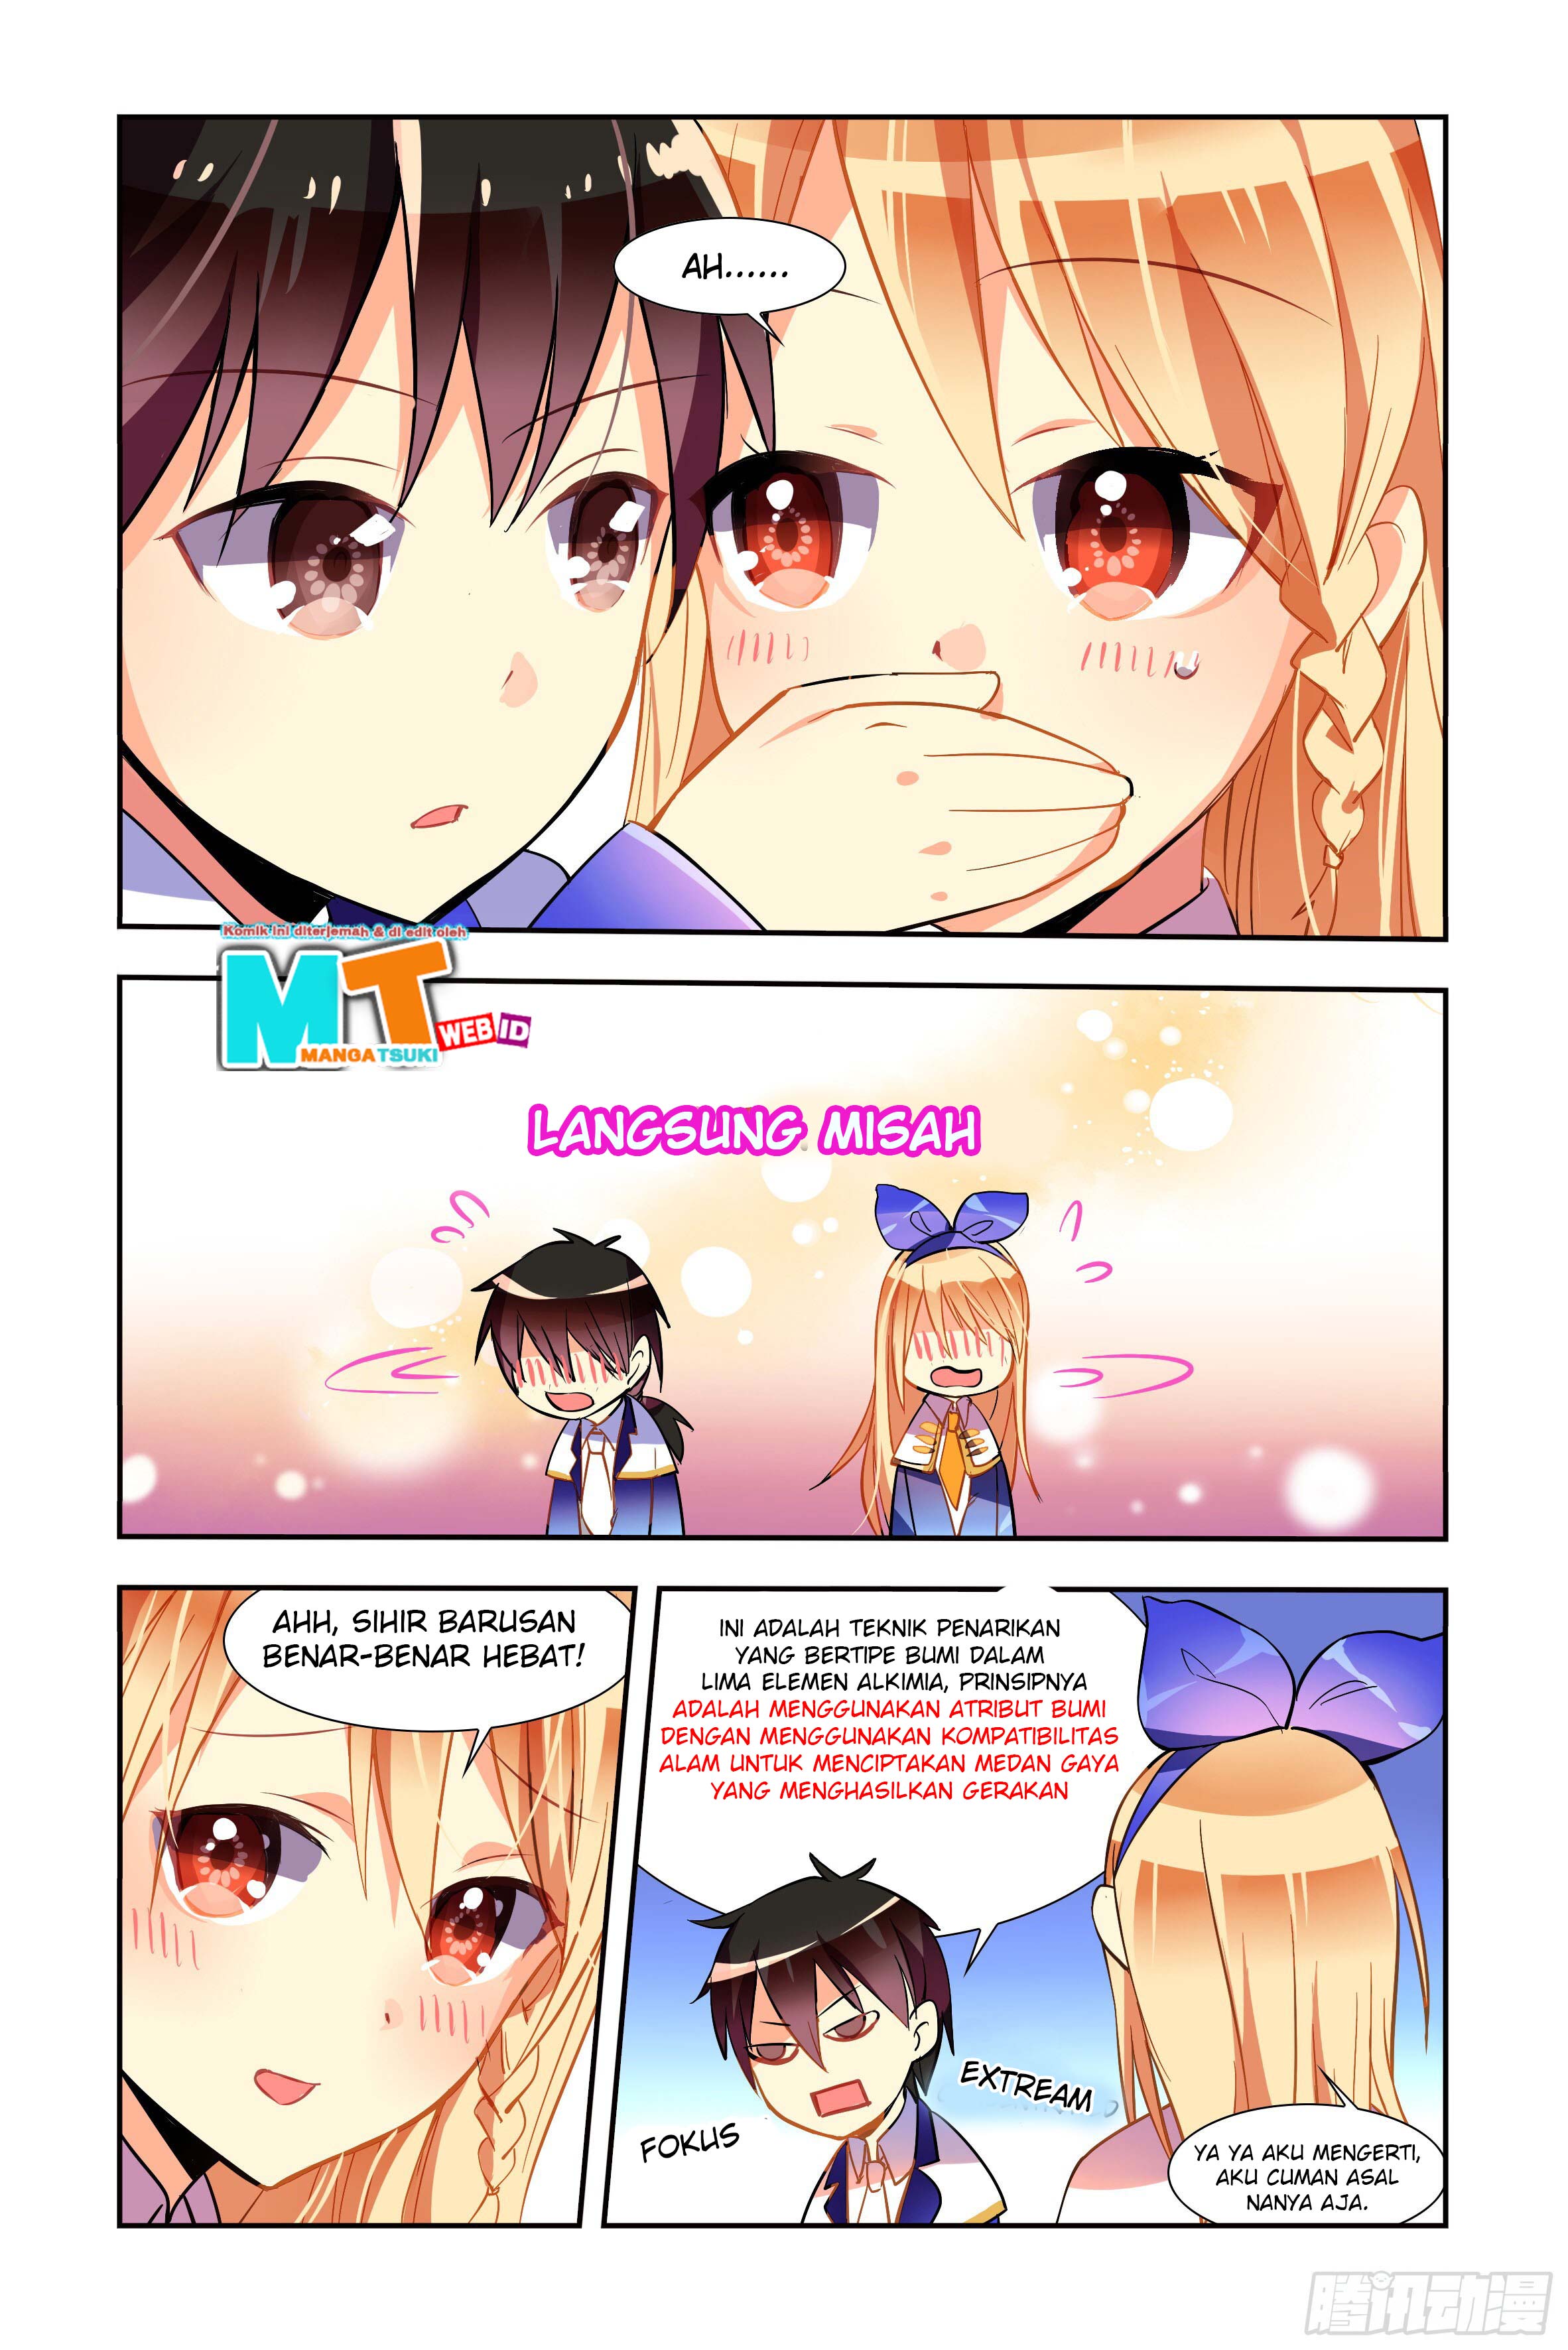 My Girlfriend Is a Dragon Chapter 02